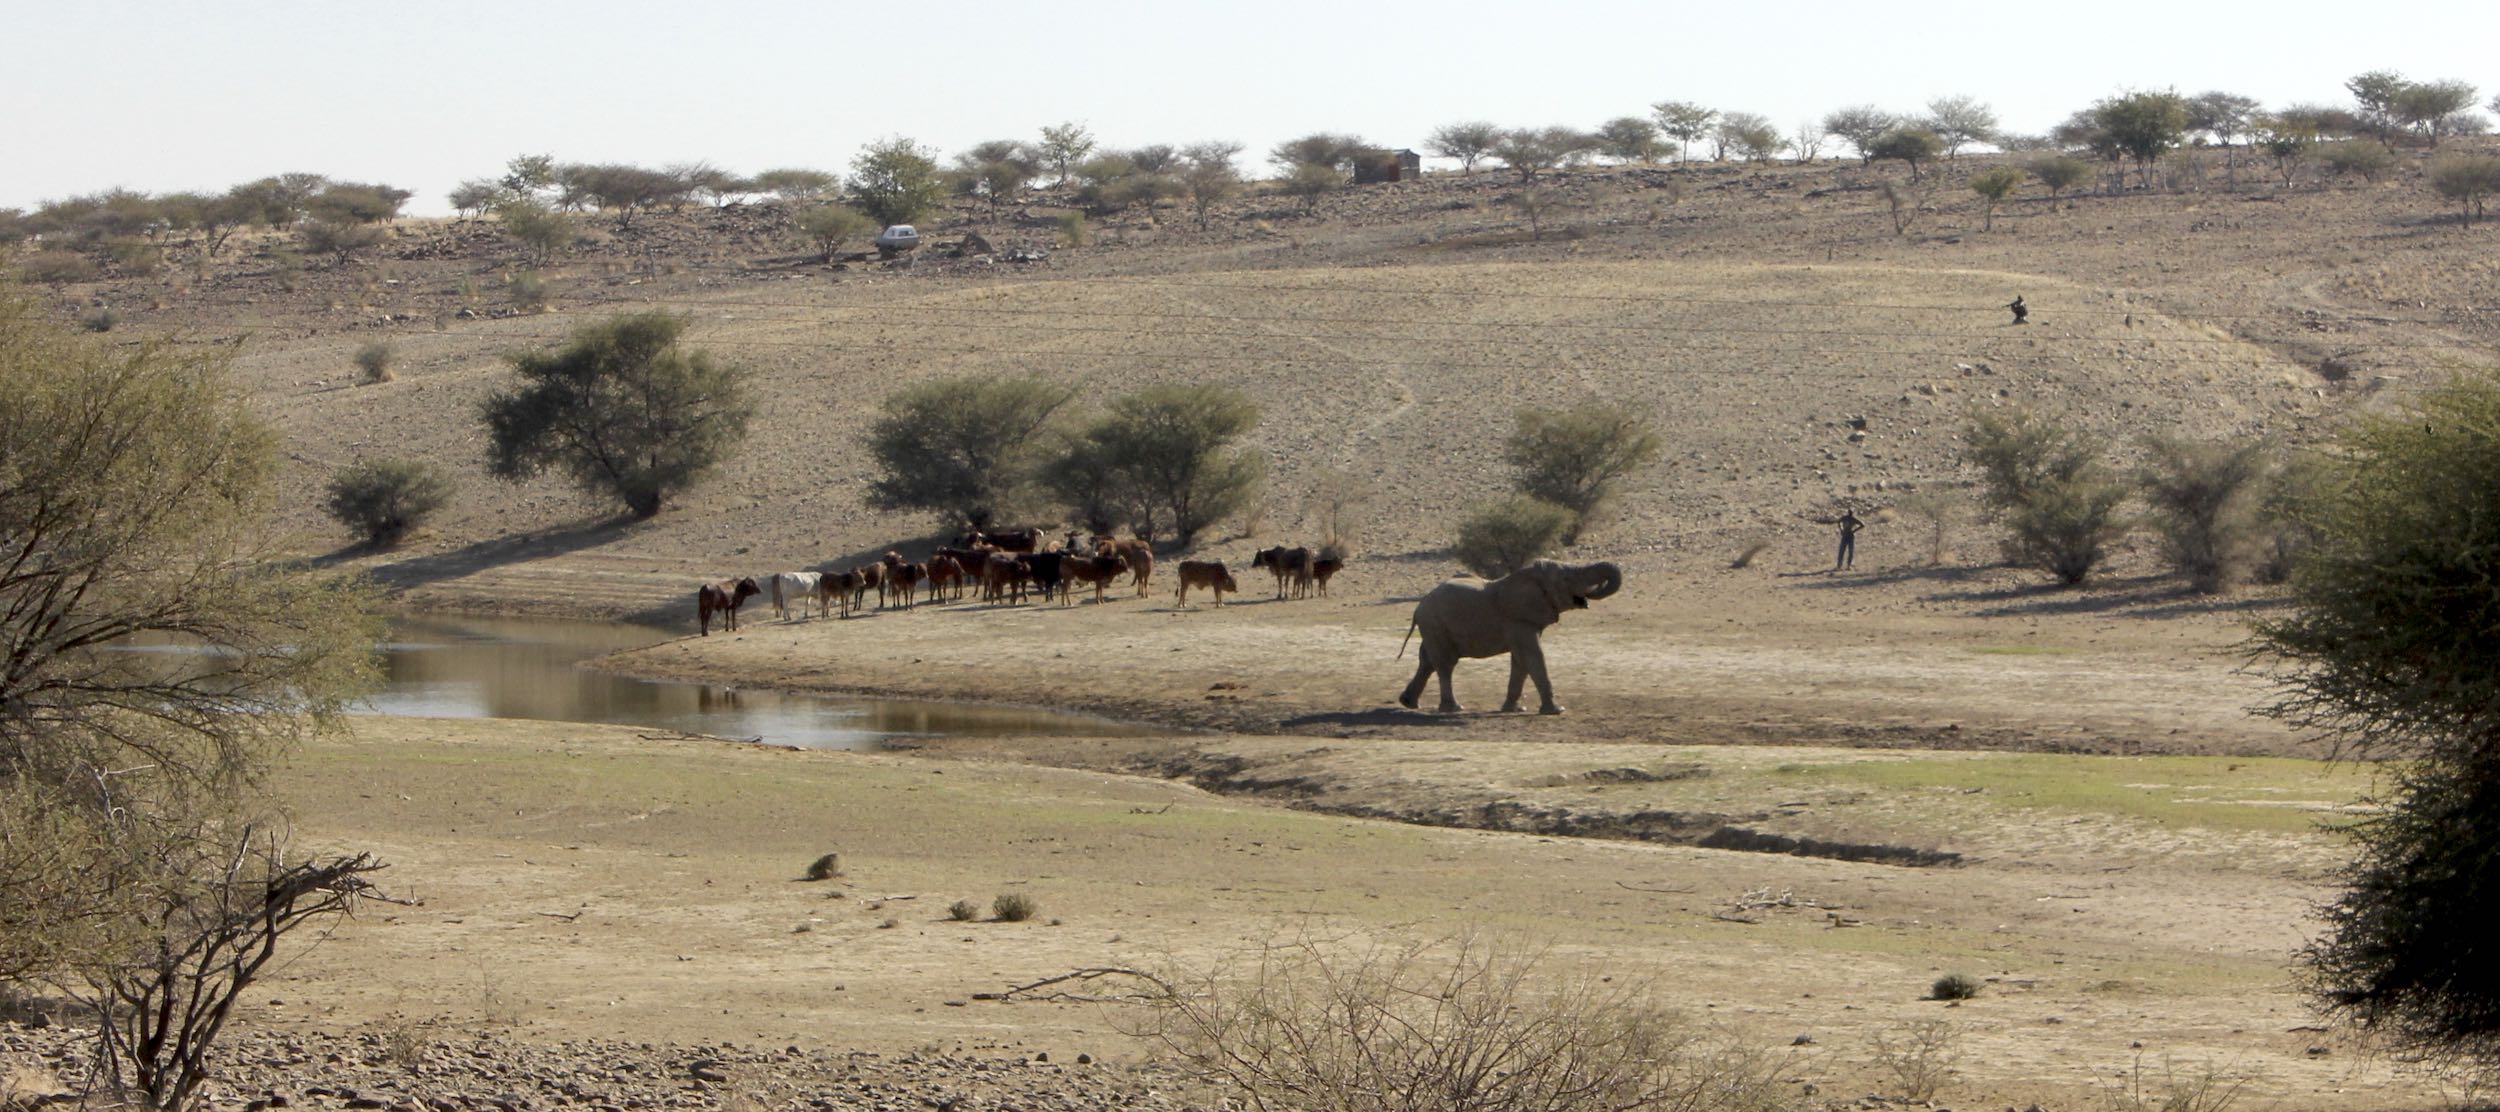 A group of cattle, and an elephant share a waterhole while a lone herder looks on.